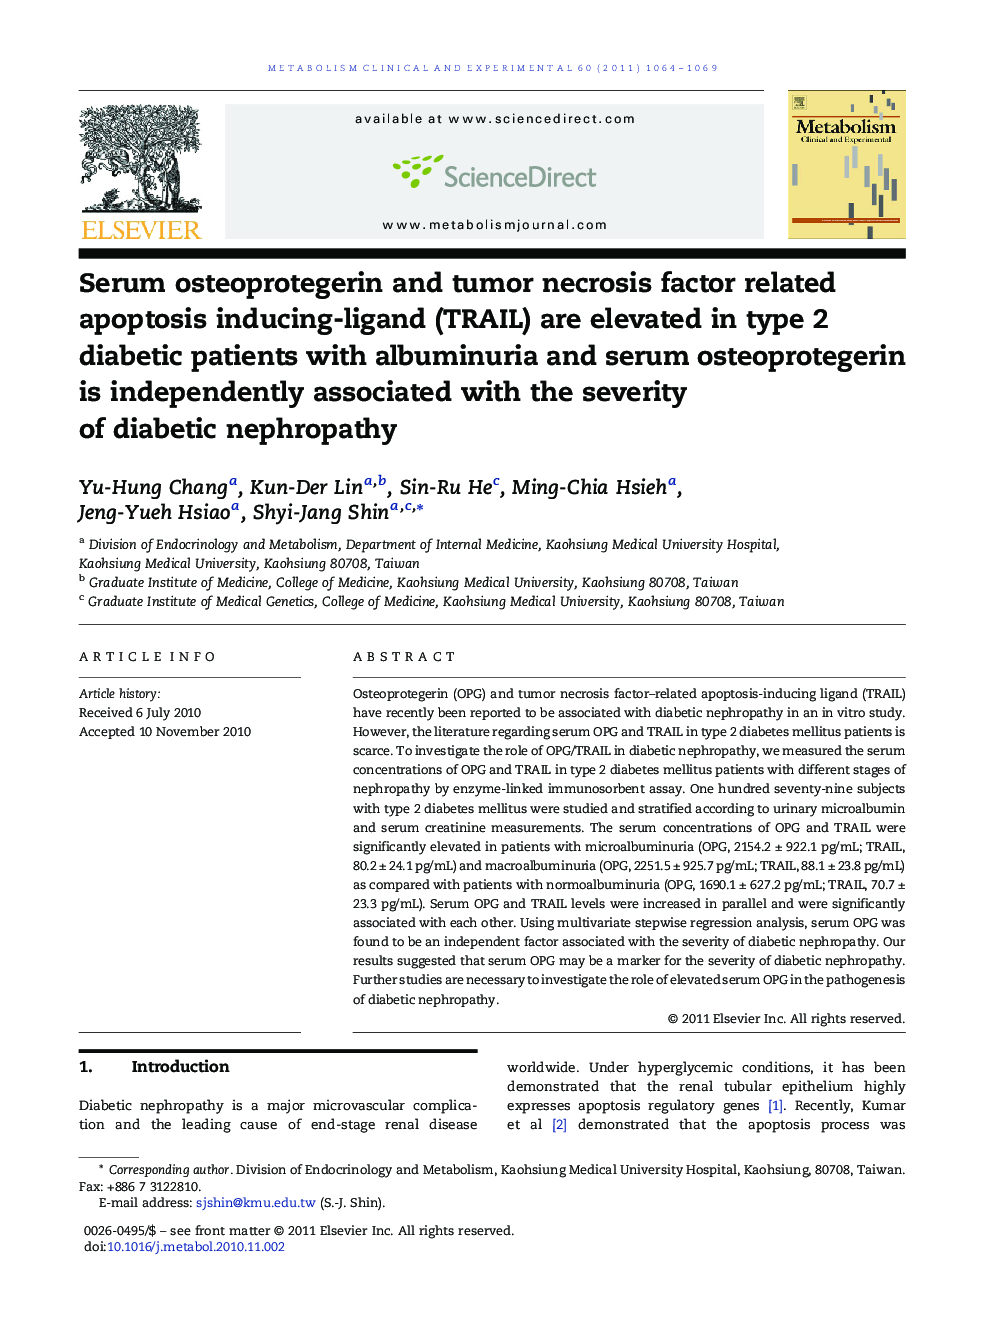 Serum osteoprotegerin and tumor necrosis factor related apoptosis inducing-ligand (TRAIL) are elevated in type 2 diabetic patients with albuminuria and serum osteoprotegerin is independently associated with the severity of diabetic nephropathy